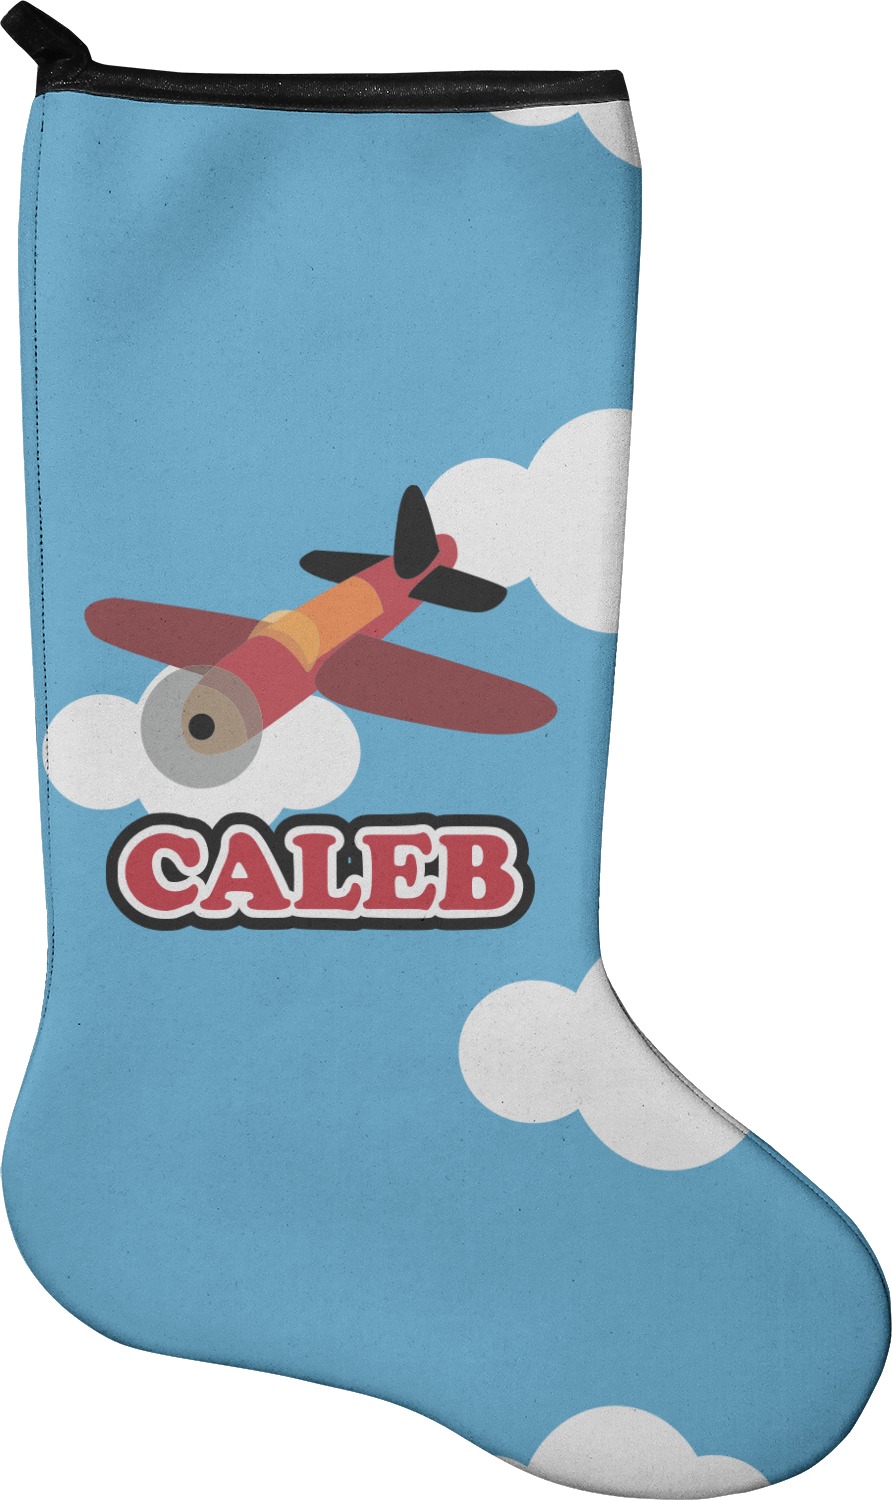 https://www.youcustomizeit.com/common/MAKE/44299/Airplane-Stocking-Single-Sided.jpg?lm=1555075644